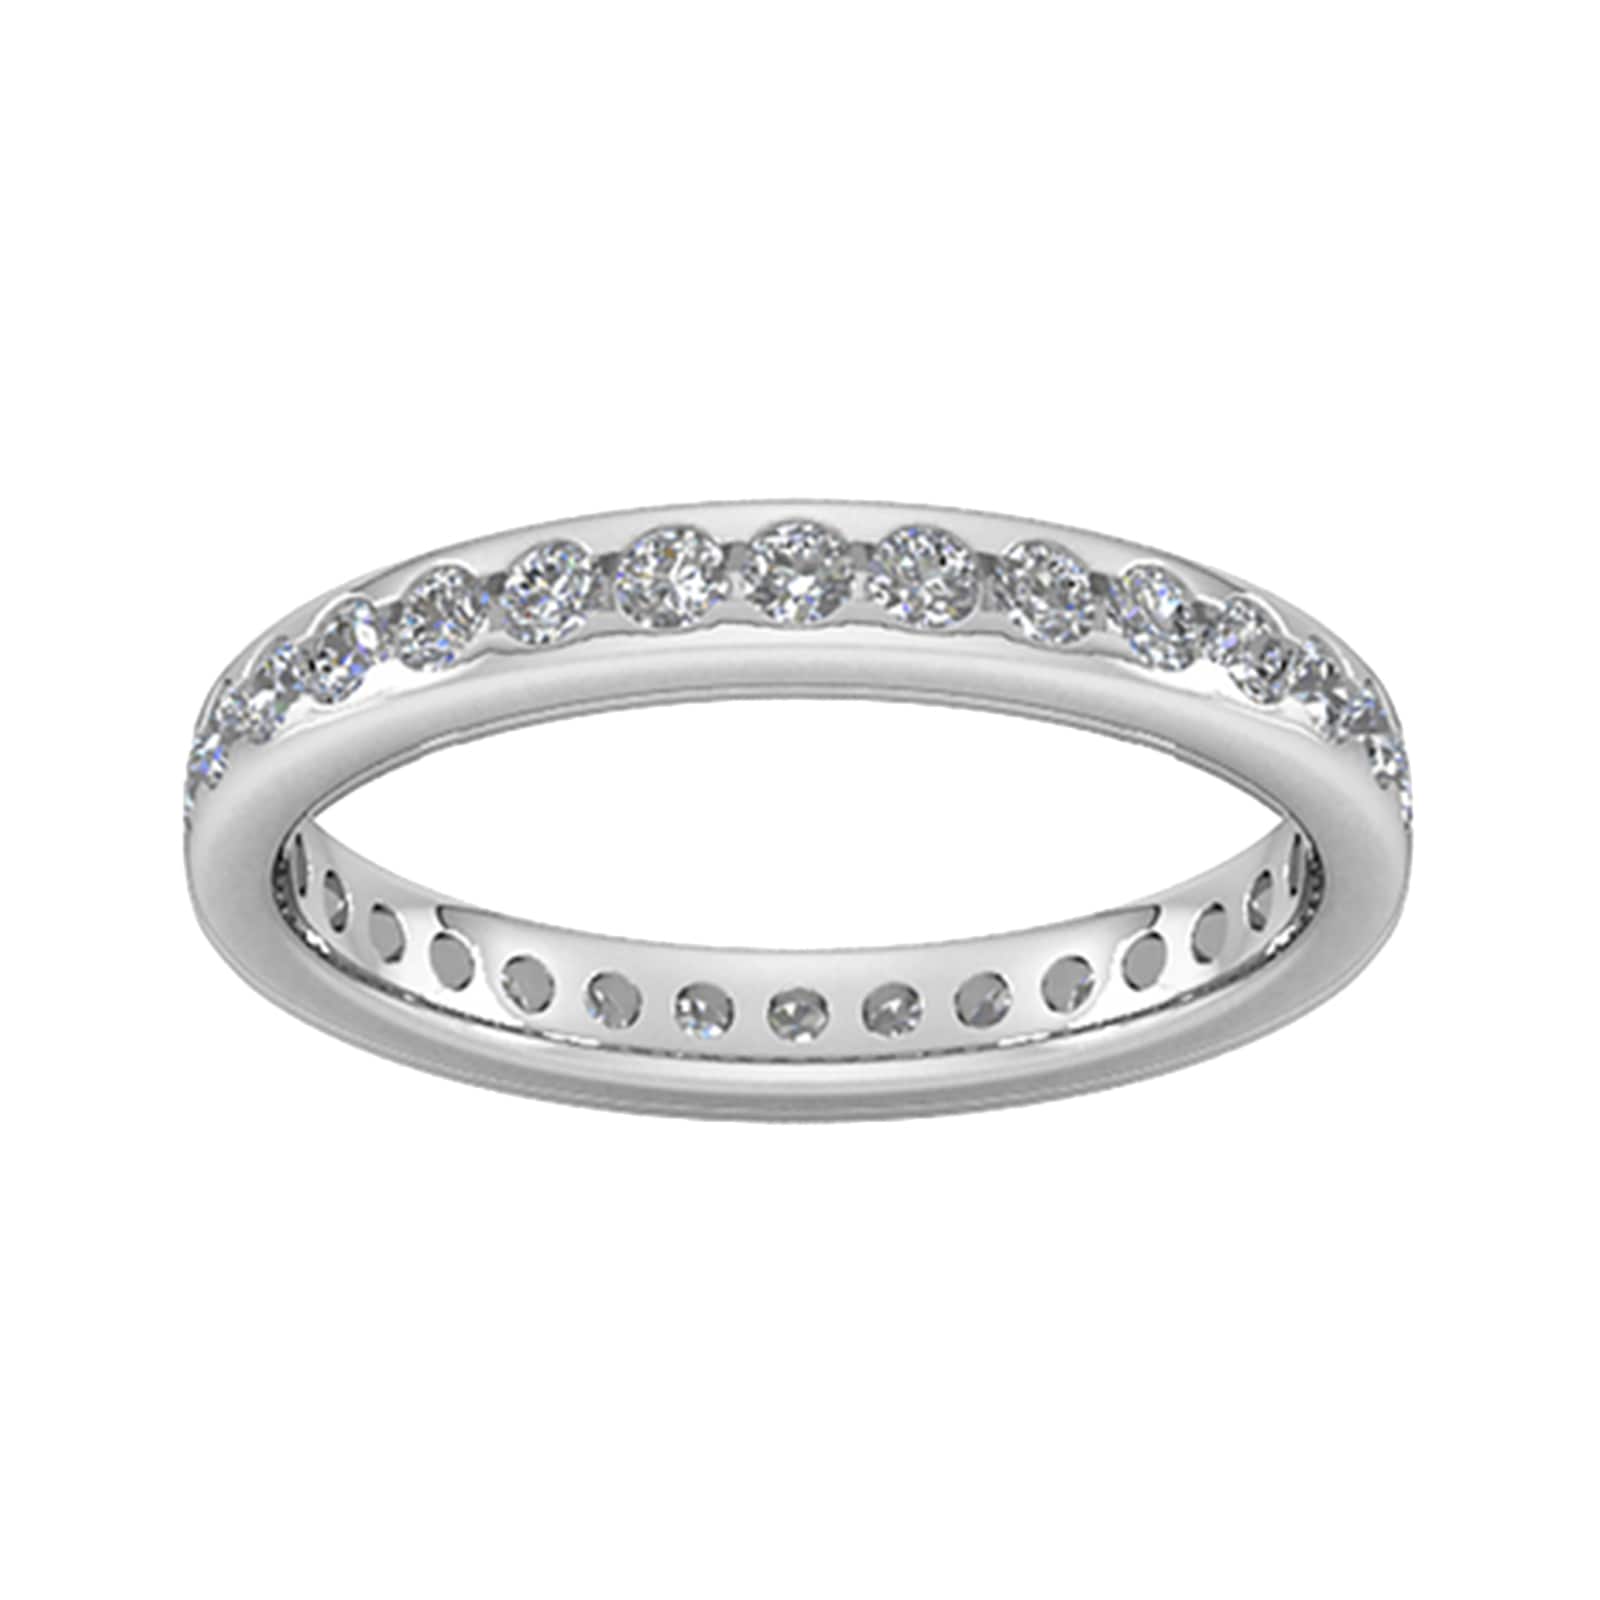 0.81 Carat Total Weight Brilliant Cut Scalloped Channel Set Diamond Wedding Ring In 9 Carat White Gold - Ring Size K